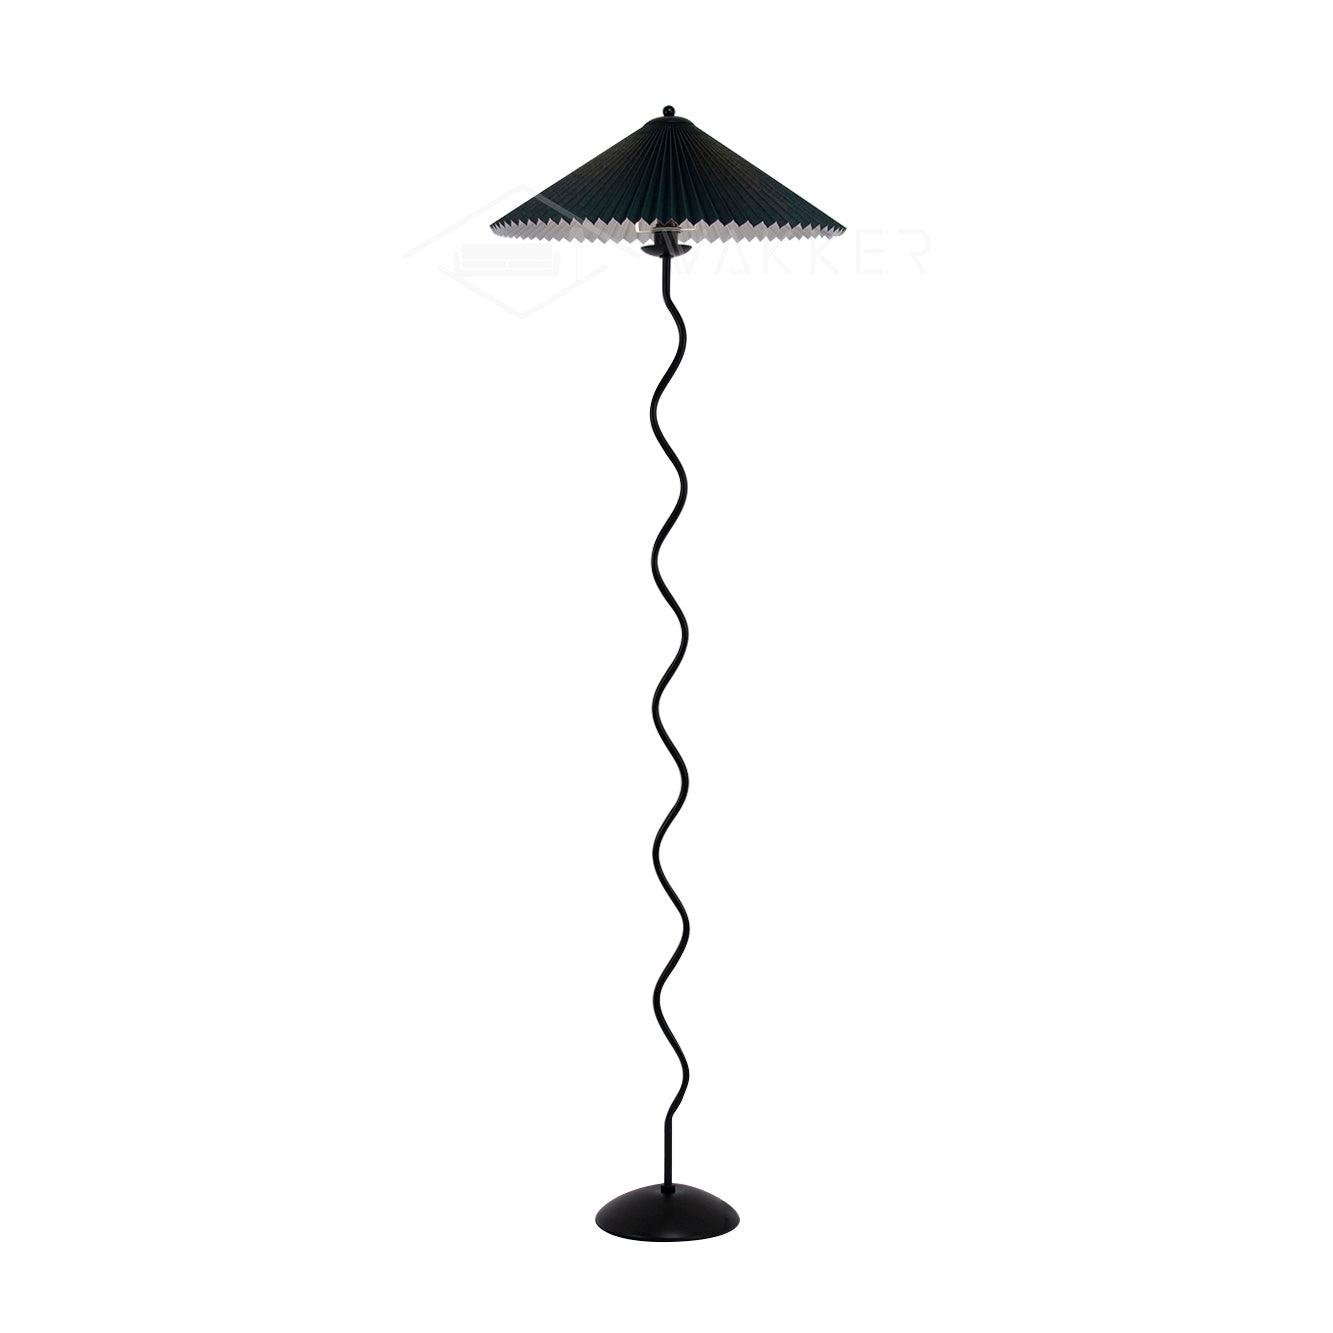 Dark Green Squiggle Floor Lamp with a Diameter of 17" and a Height of 59", or 43cm in Diameter and 150cm in Height, with UK Plug